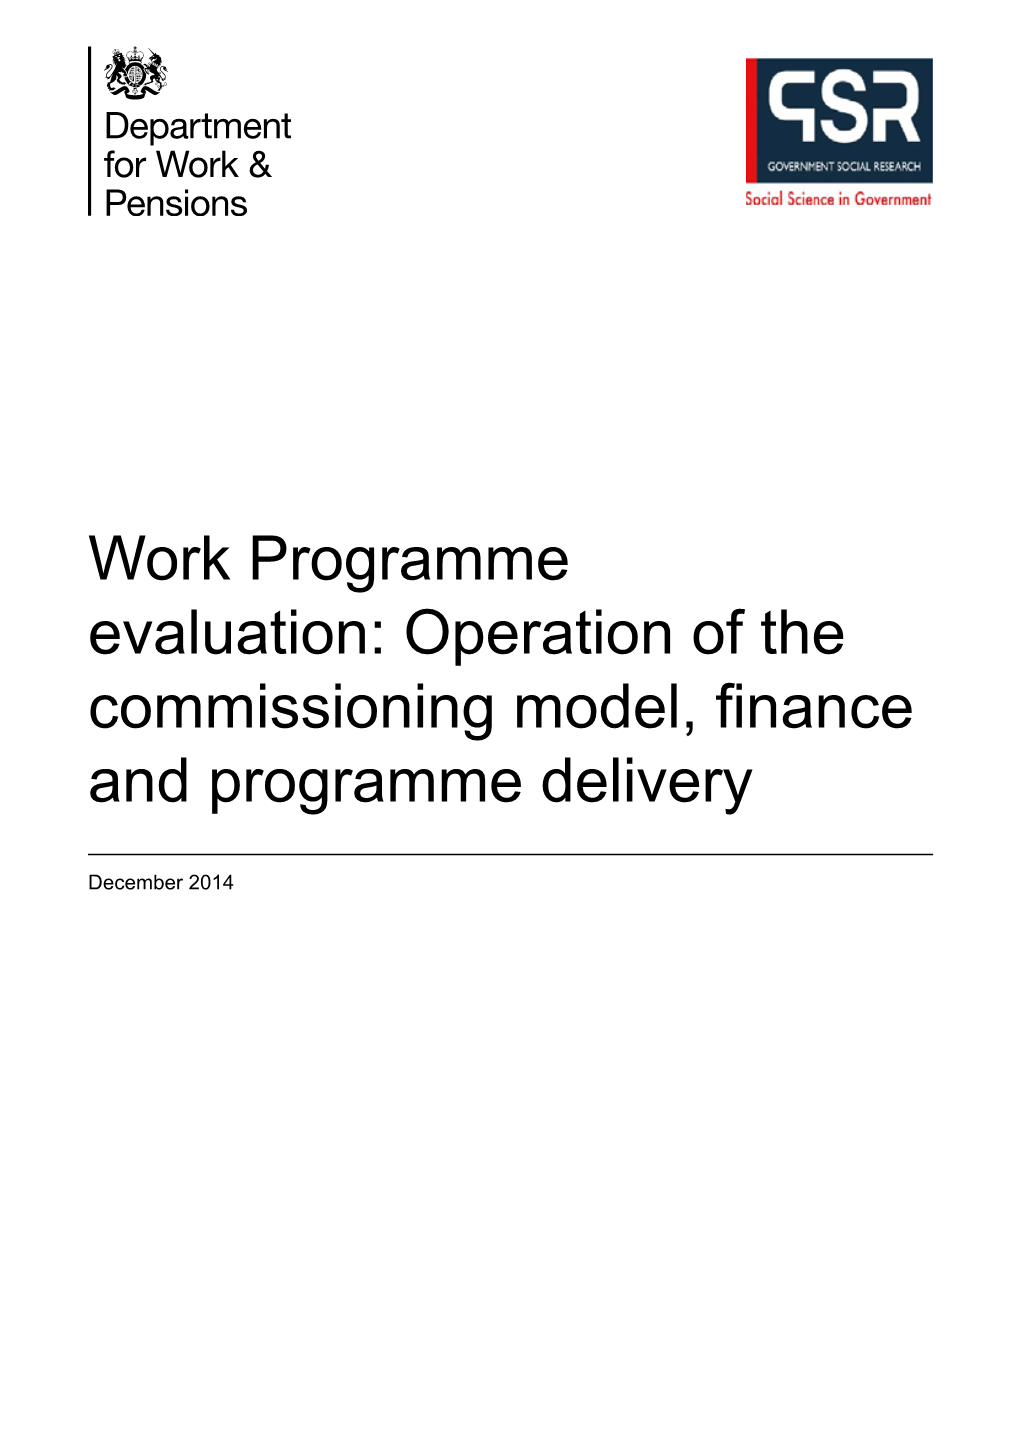 Work Programme Evaluation: Operation of the Commissioning Model, Finance and Programme Delivery